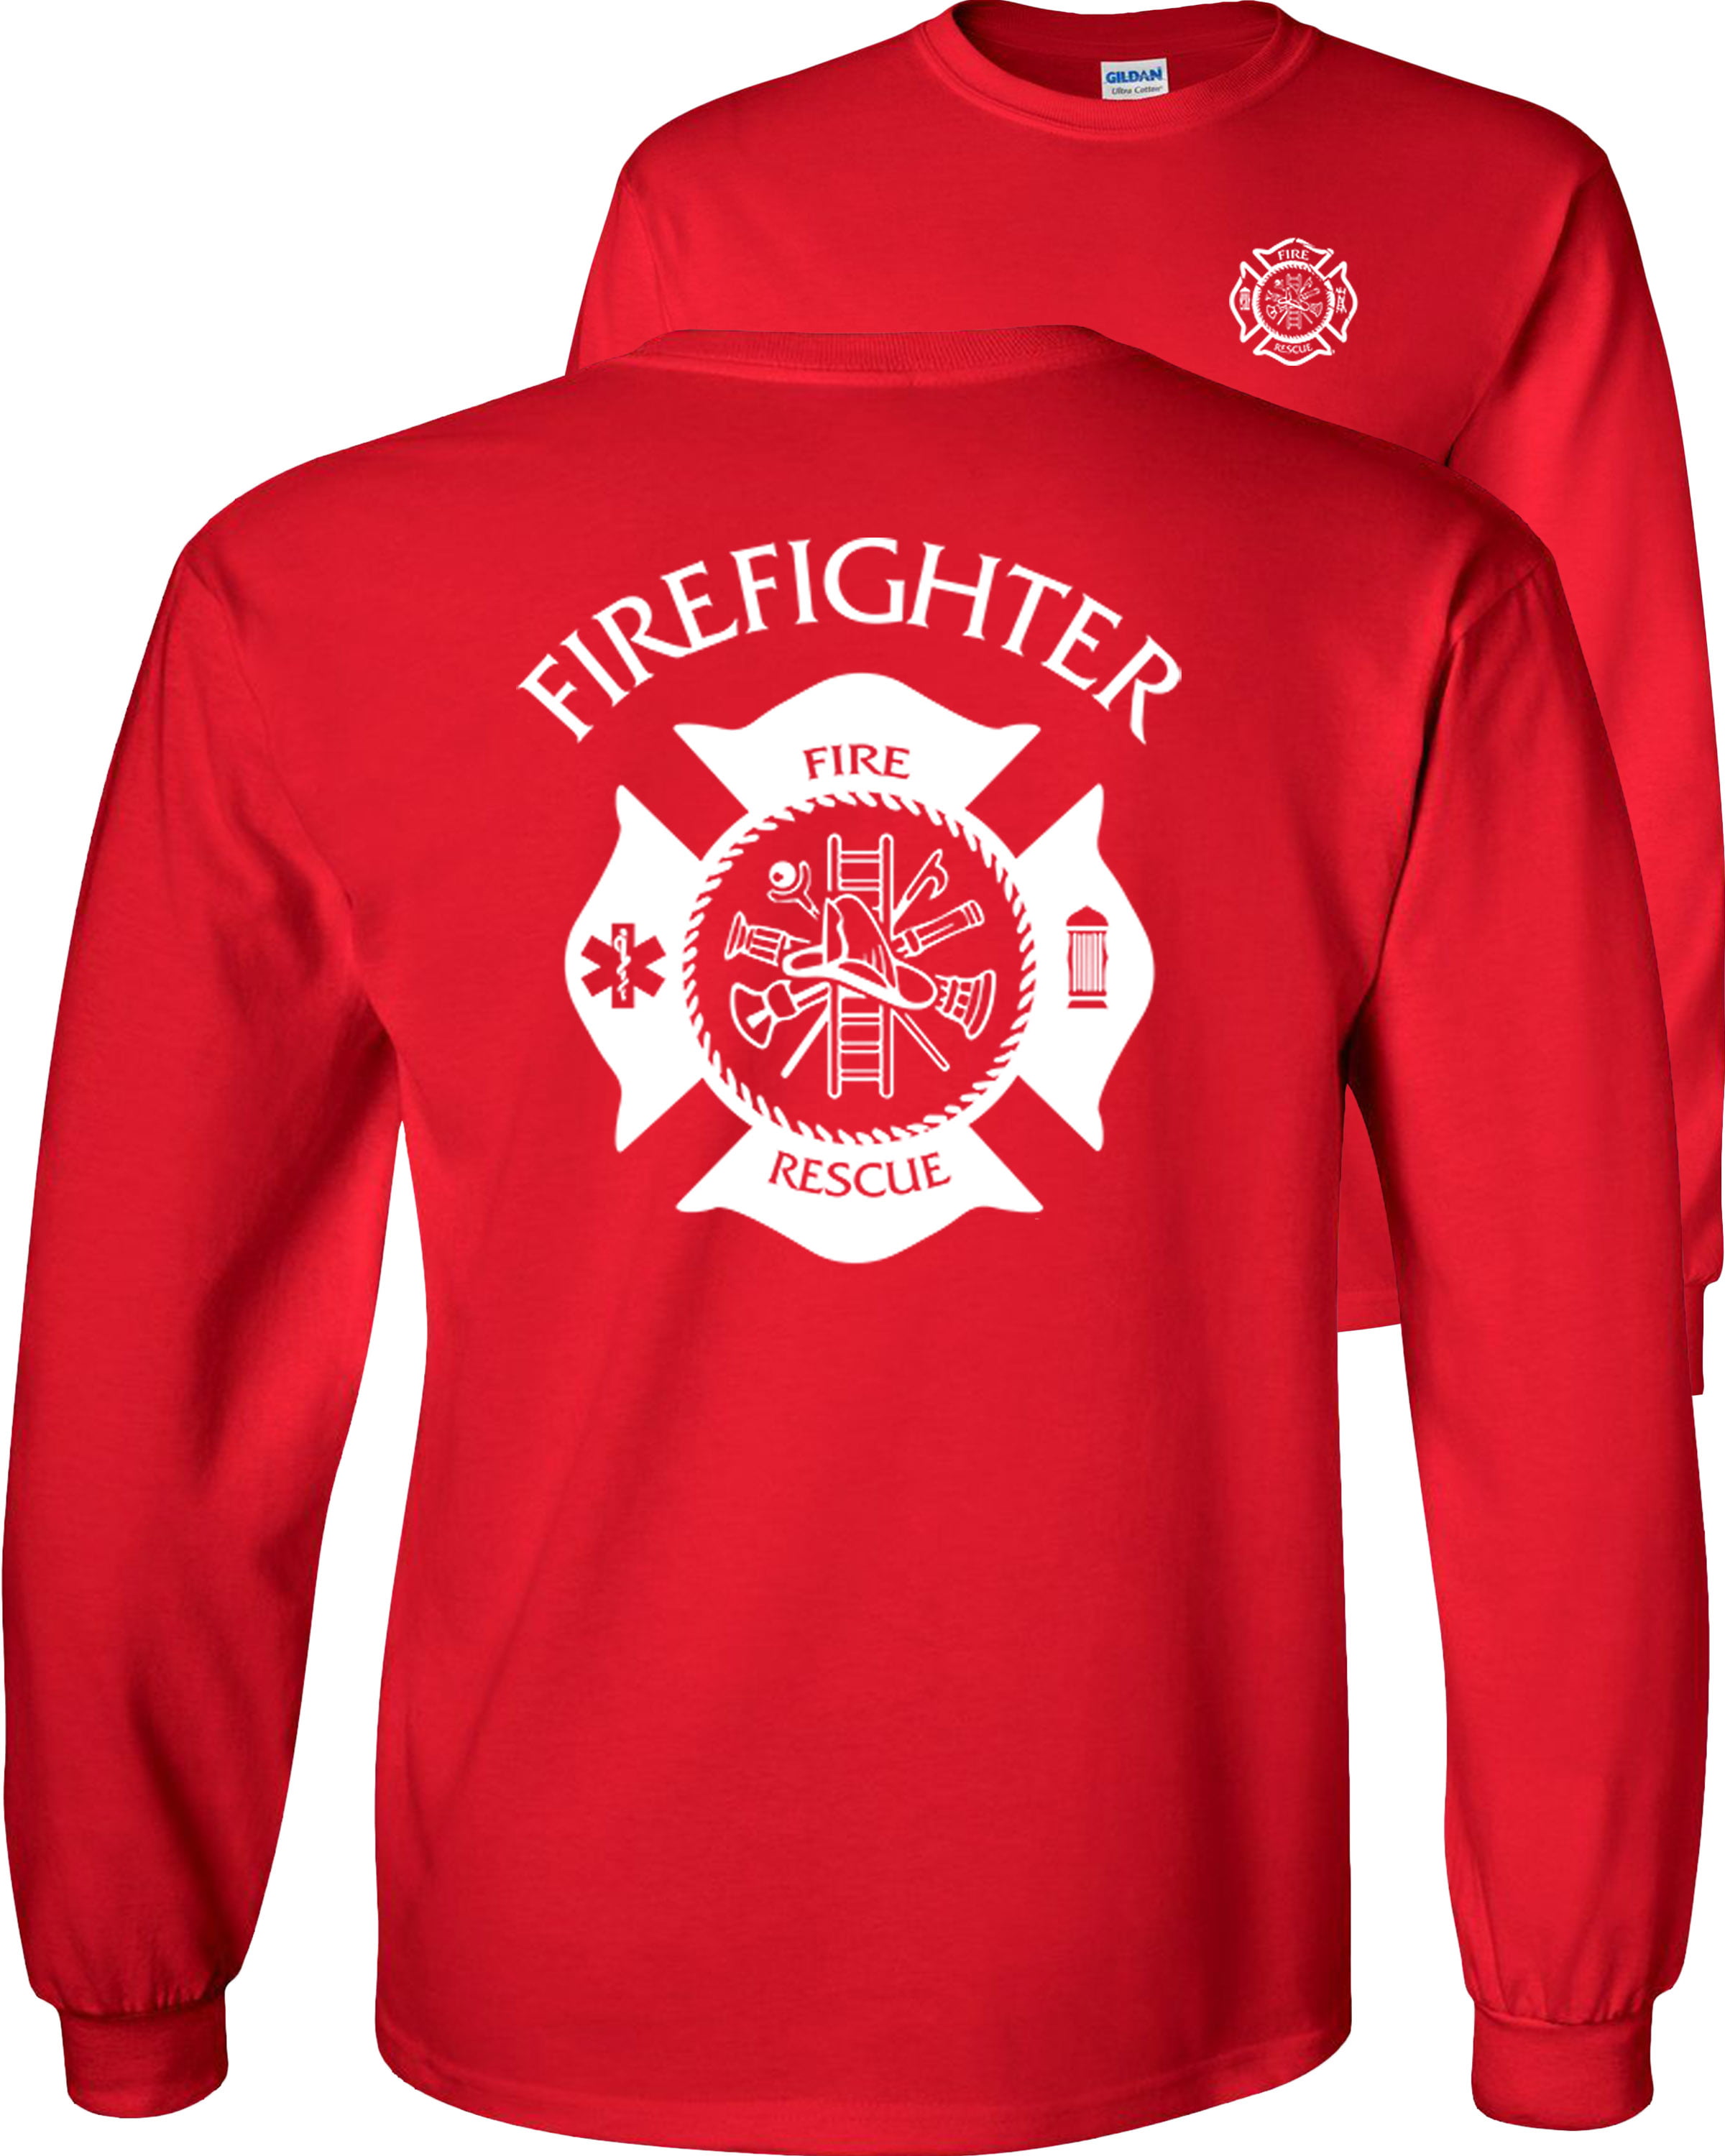 Firefighters Kick Ash Youth T-Shirt  Volunteer FD Fire Rescue Tee